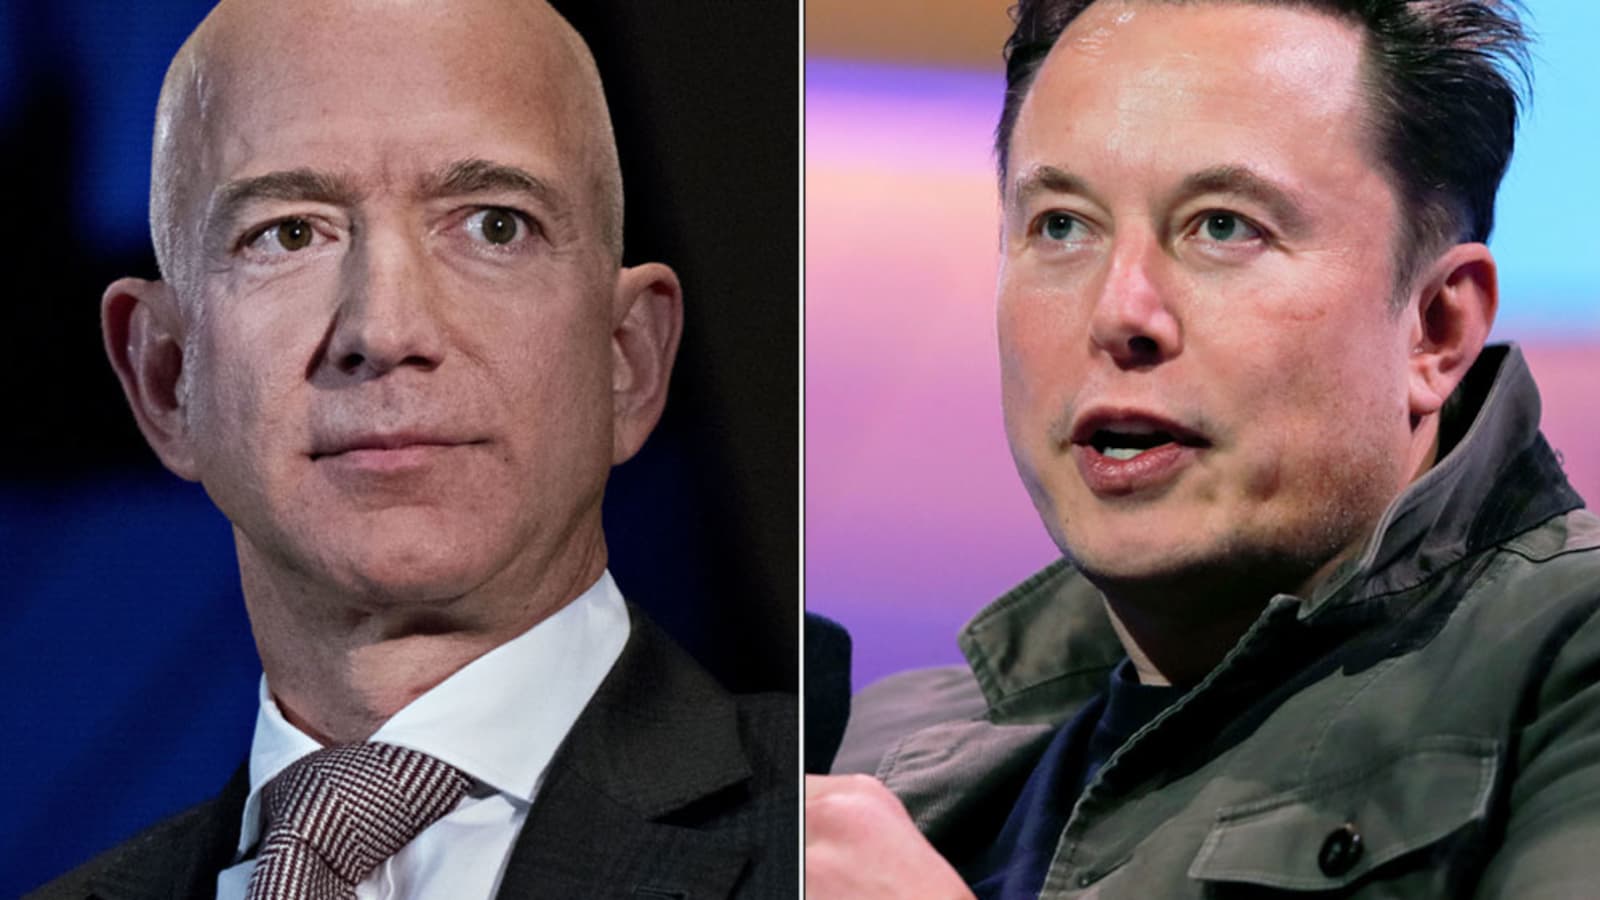 Jeff Bezos Full Time Work is to File Lawsuits Against SpaceX Says Elon Musk